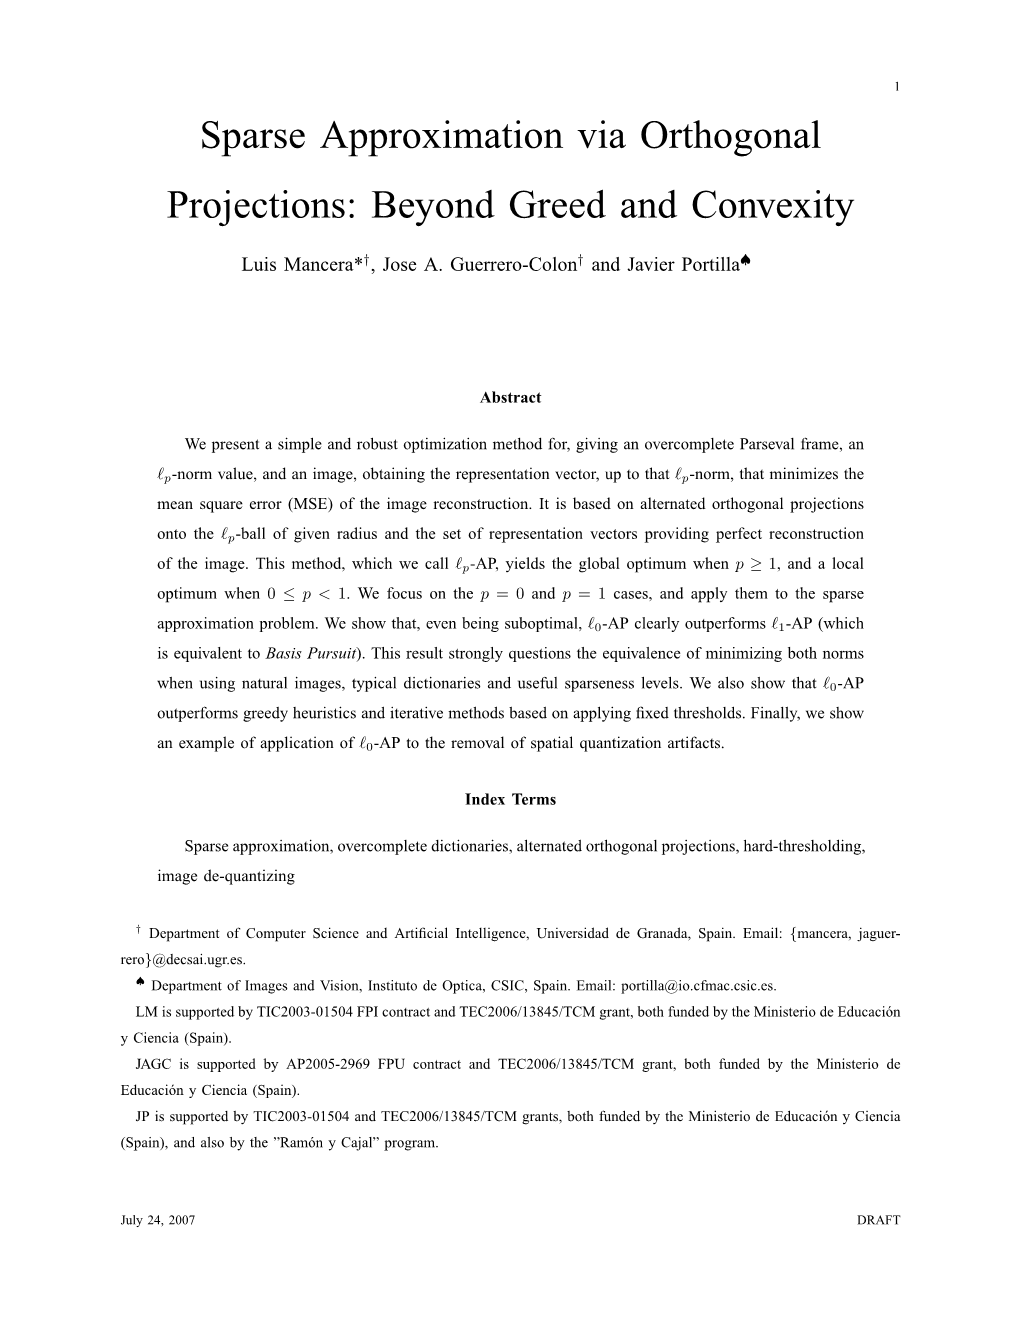 Sparse Approximation Via Orthogonal Projections: Beyond Greed and Convexity